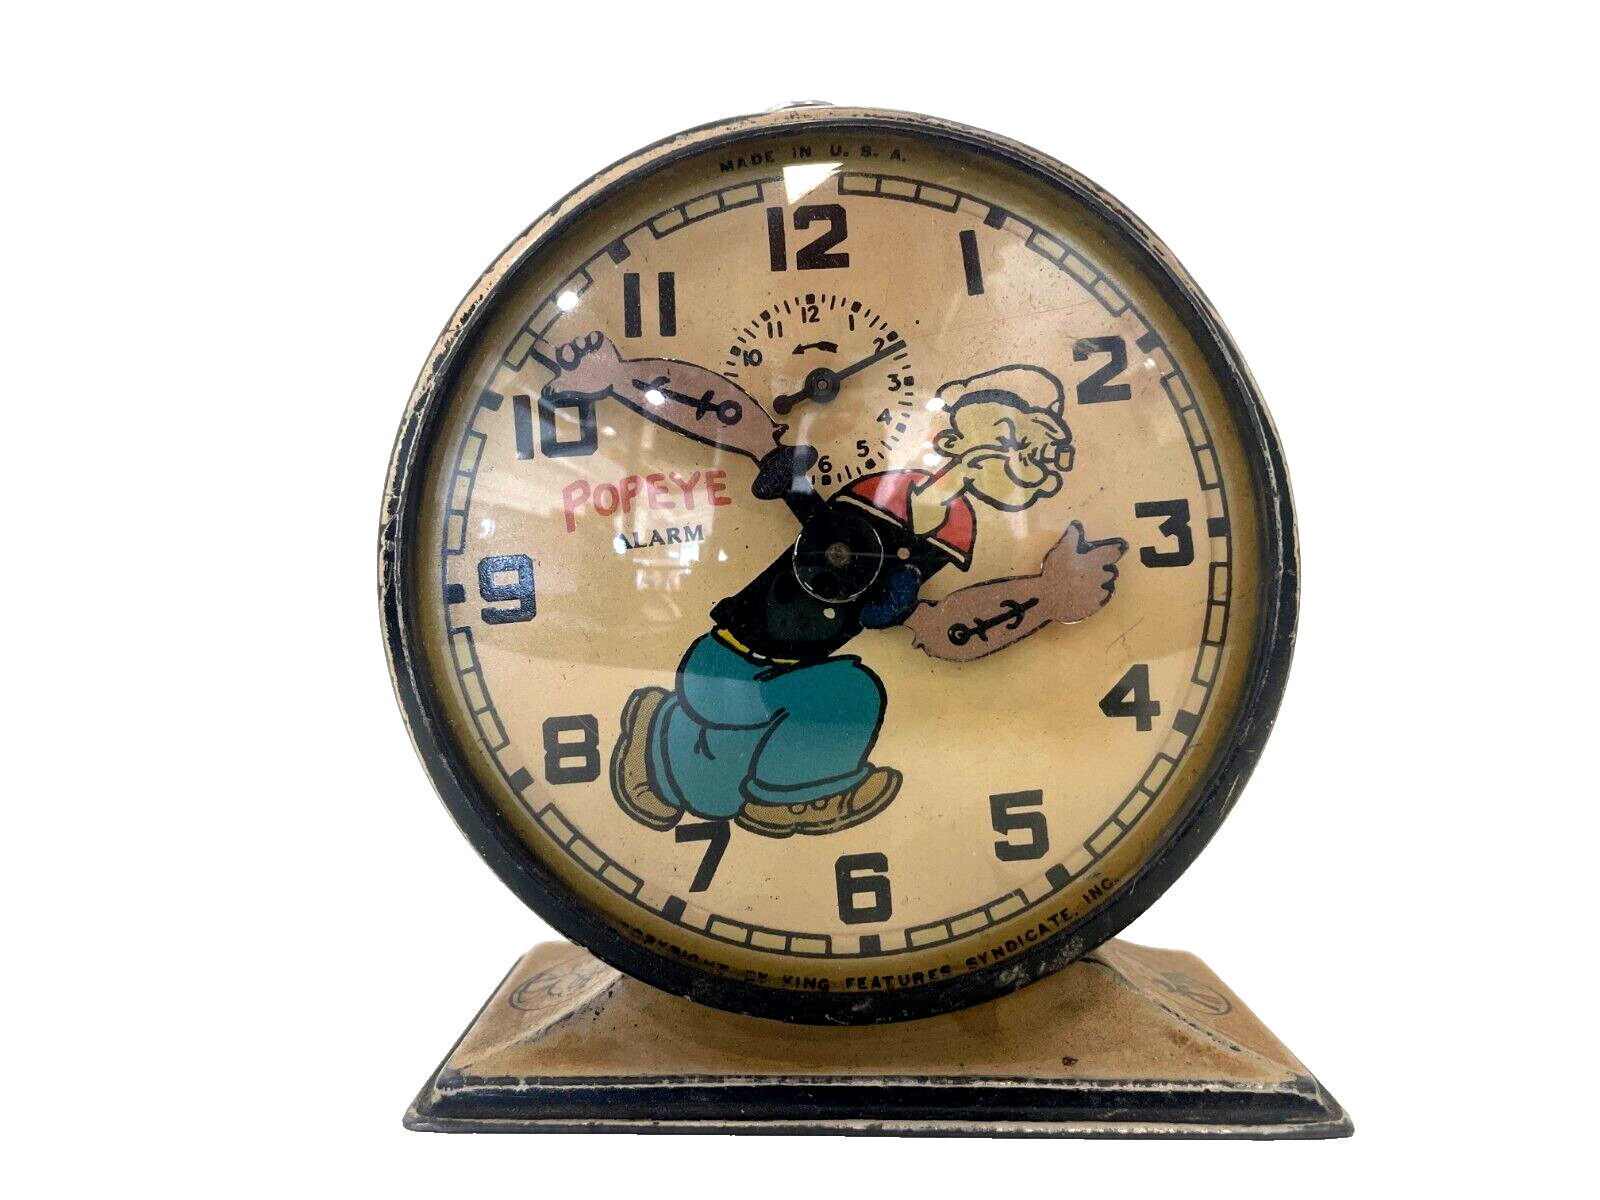 RARE 1930's POPEYE ALARM CLOCK KING FEATURES NEW HAVEN Co LITHO METAL CASE VTG